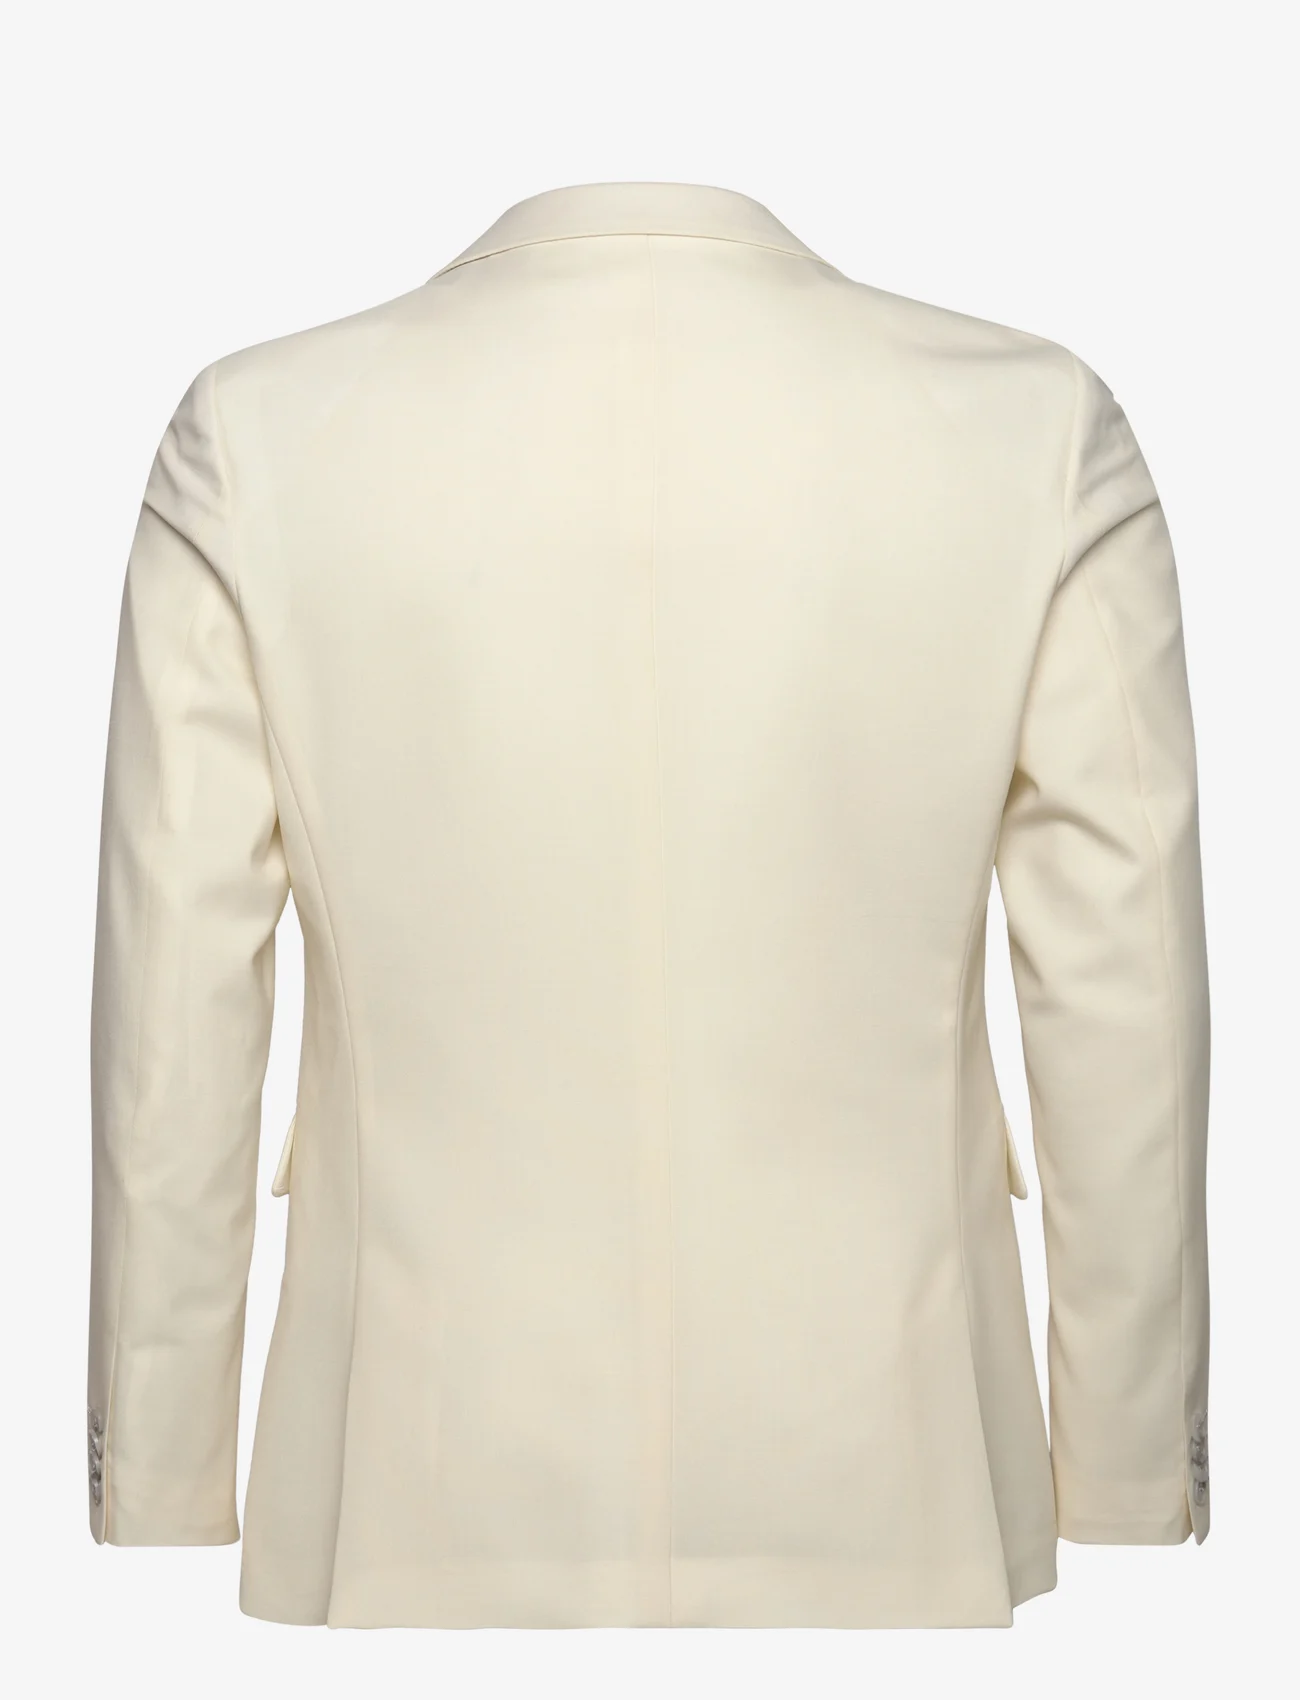 Matinique - MAgeorge F - double breasted blazers - broken white - 1